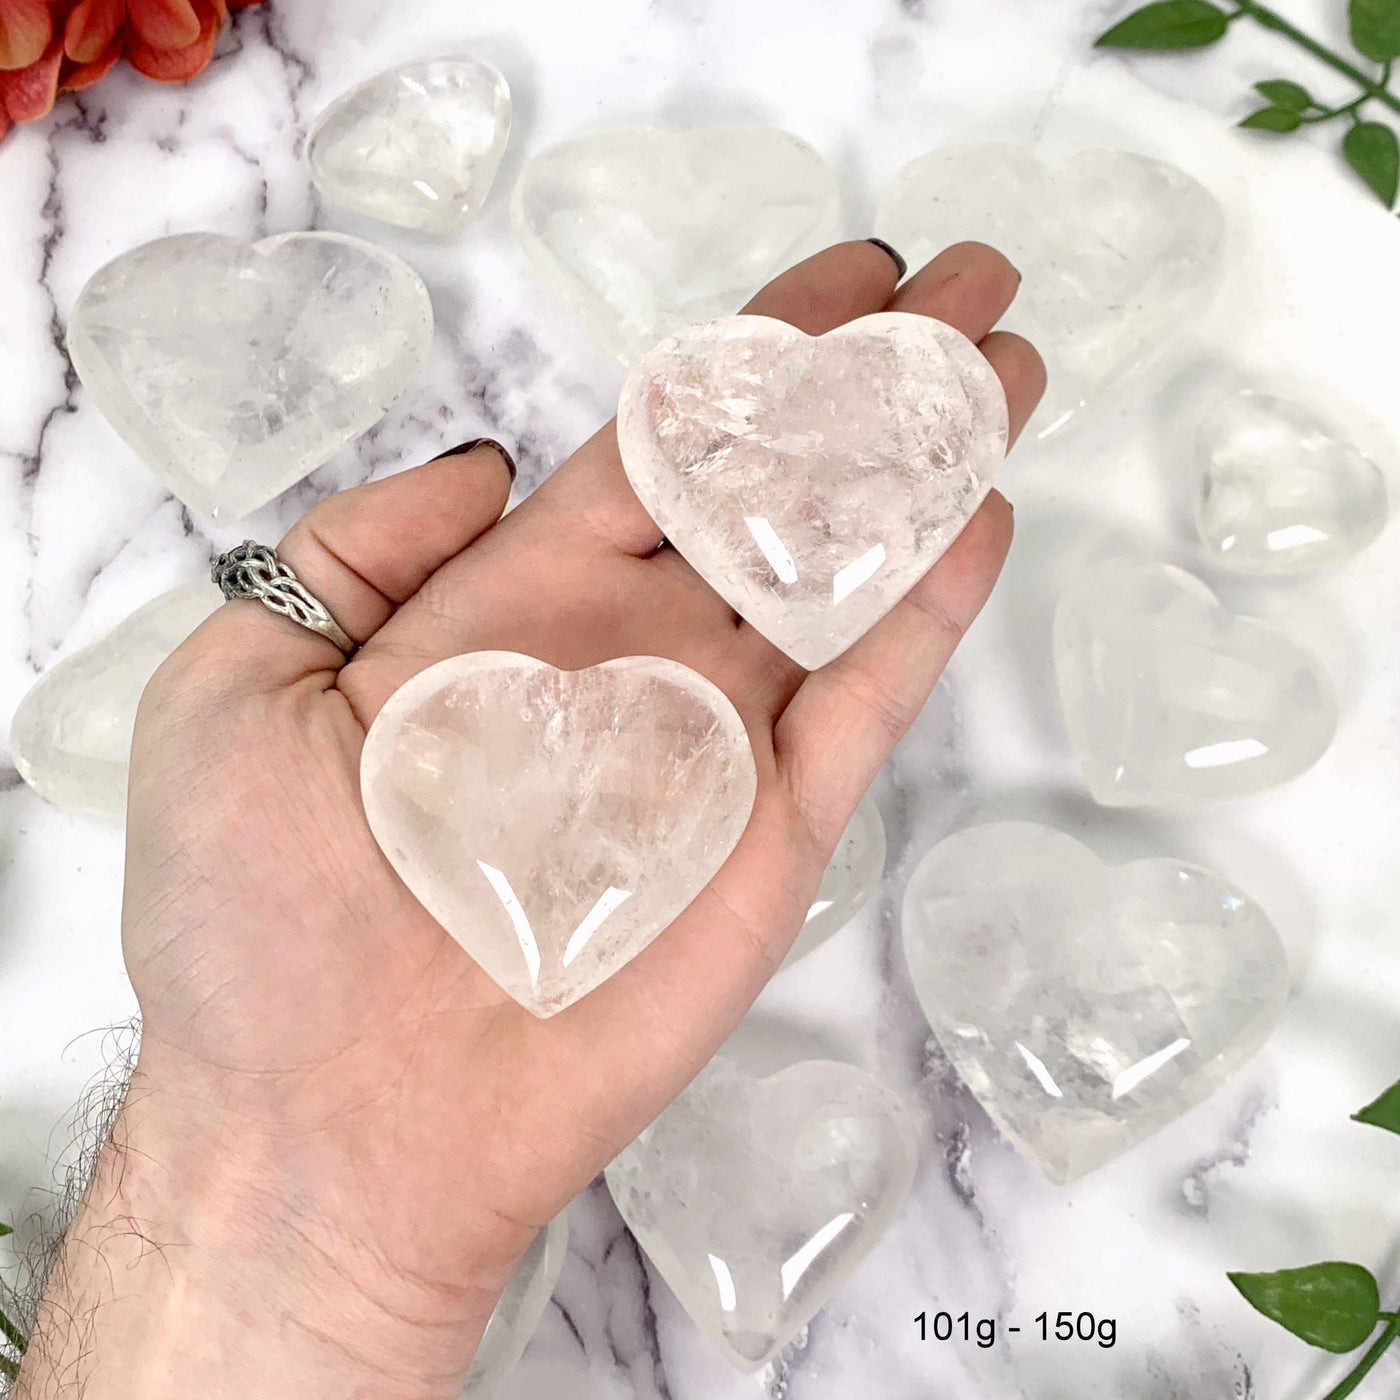 Crystal Quartz Hearts--2 101gram-150gram hearts with inclusions in hand with with multiple hearts in background.